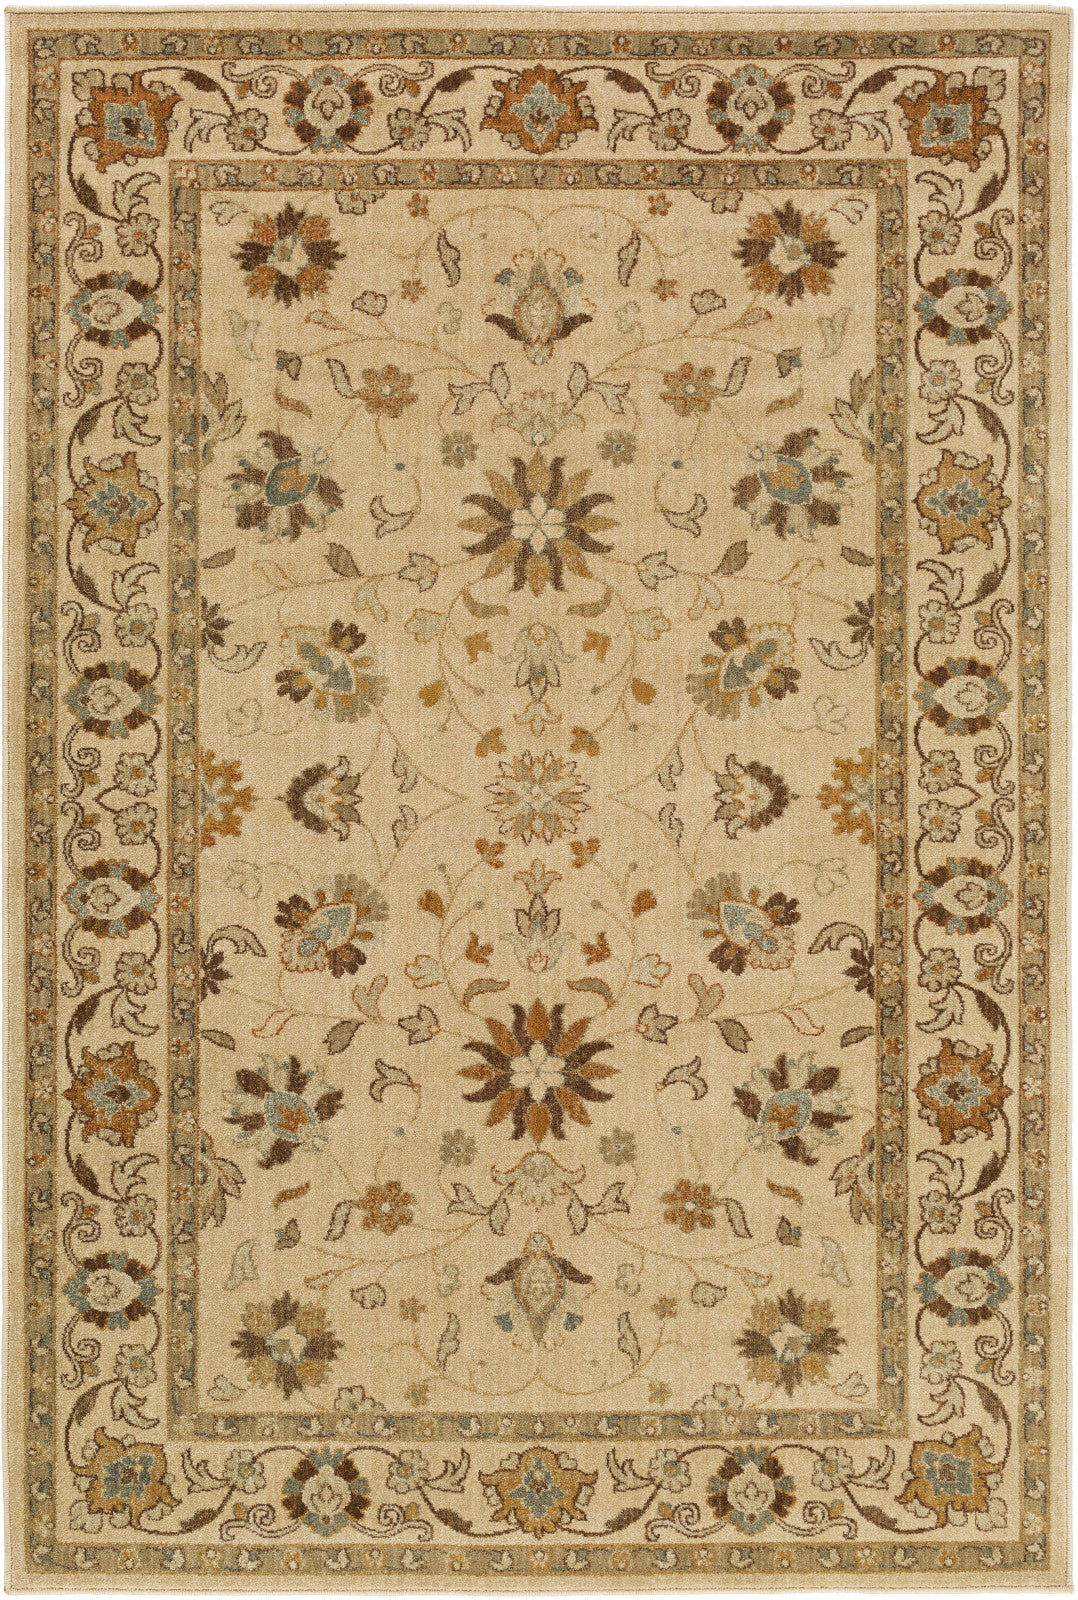 Surya Willow Lodge WLL-1004 White Area Rug by Mossy Oak